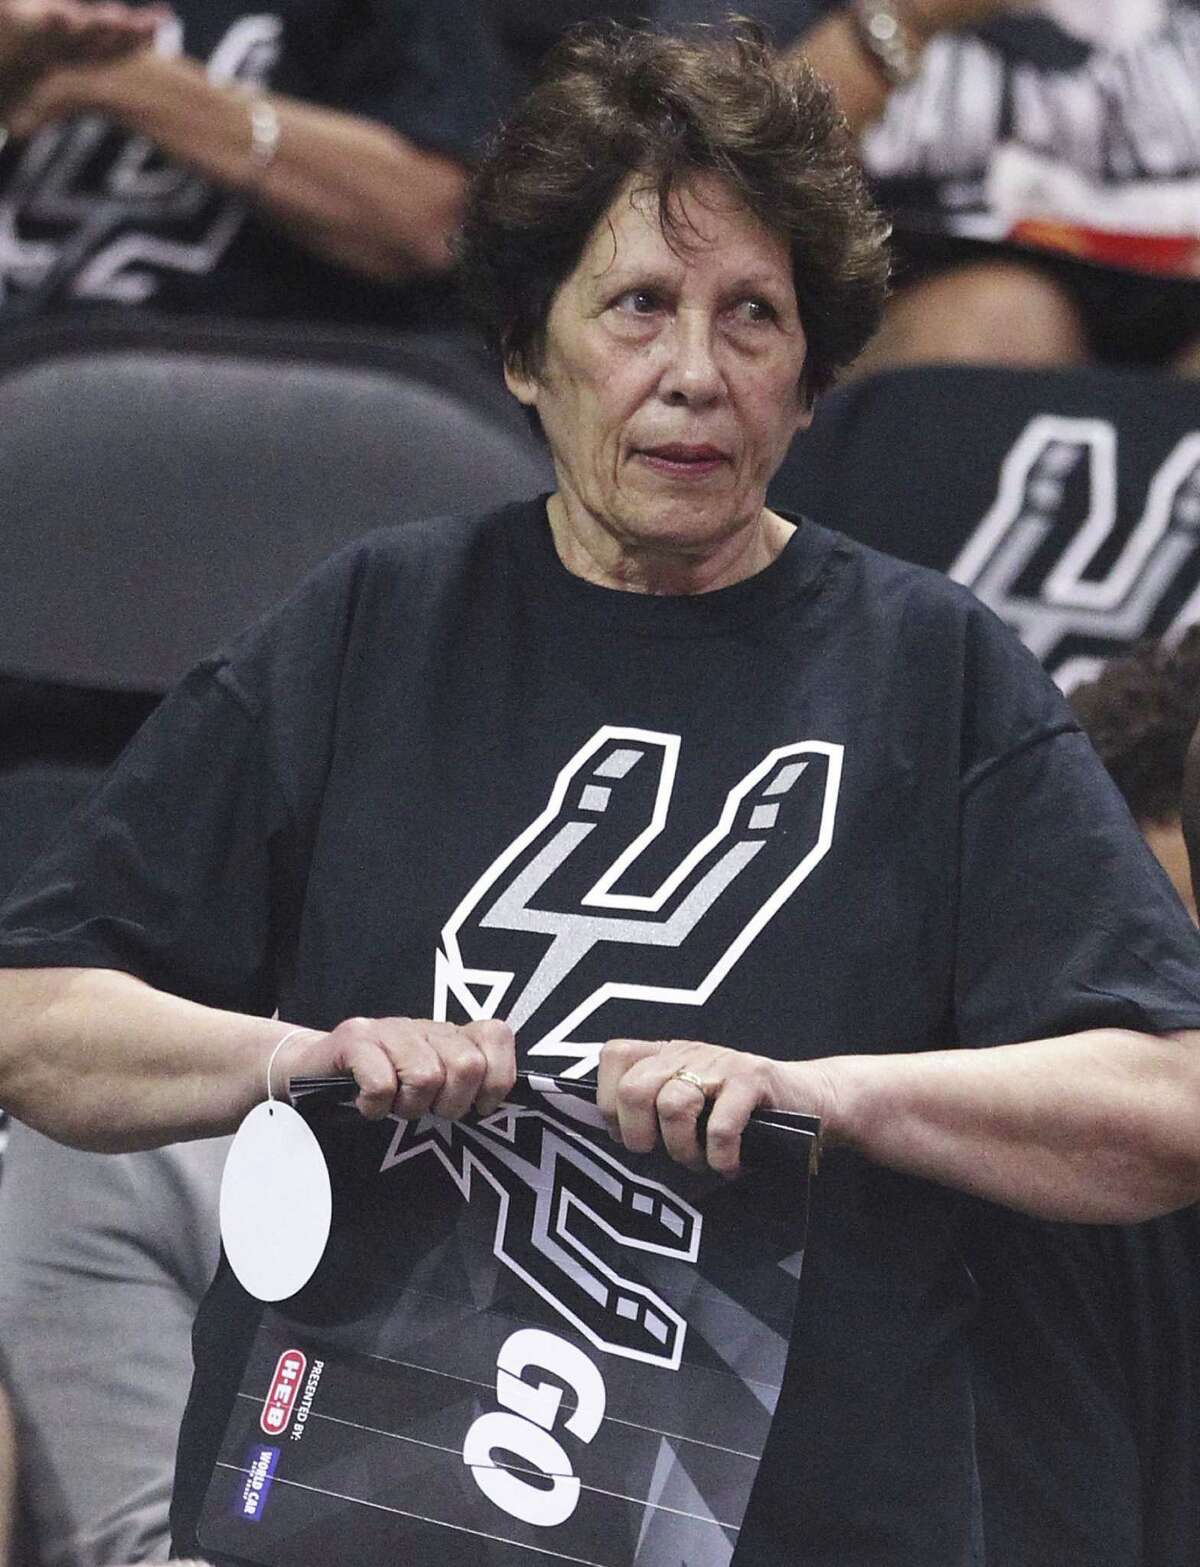 Yvonne Mills, the mother of Spur Patty Mills, watches from the stands during Game 1 of the NBA Finals.